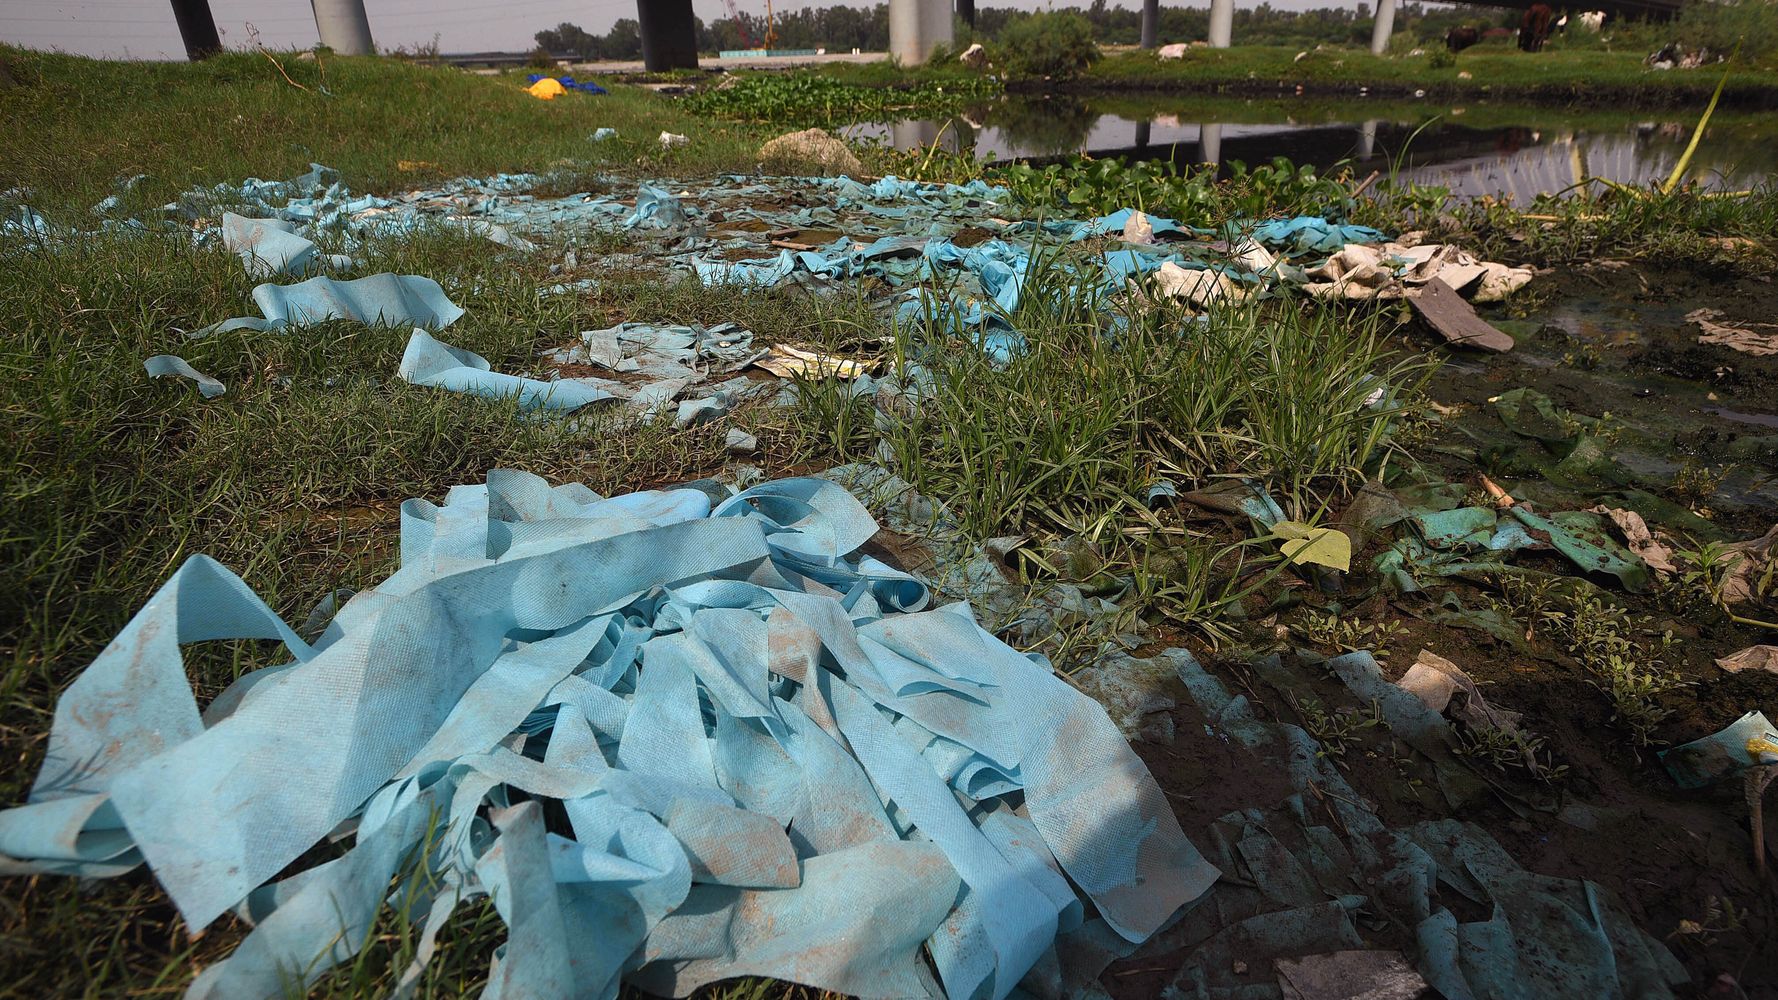 Plastic Masks, PPE, Biomedical Waste Choke Water Bodies In India - HuffPost